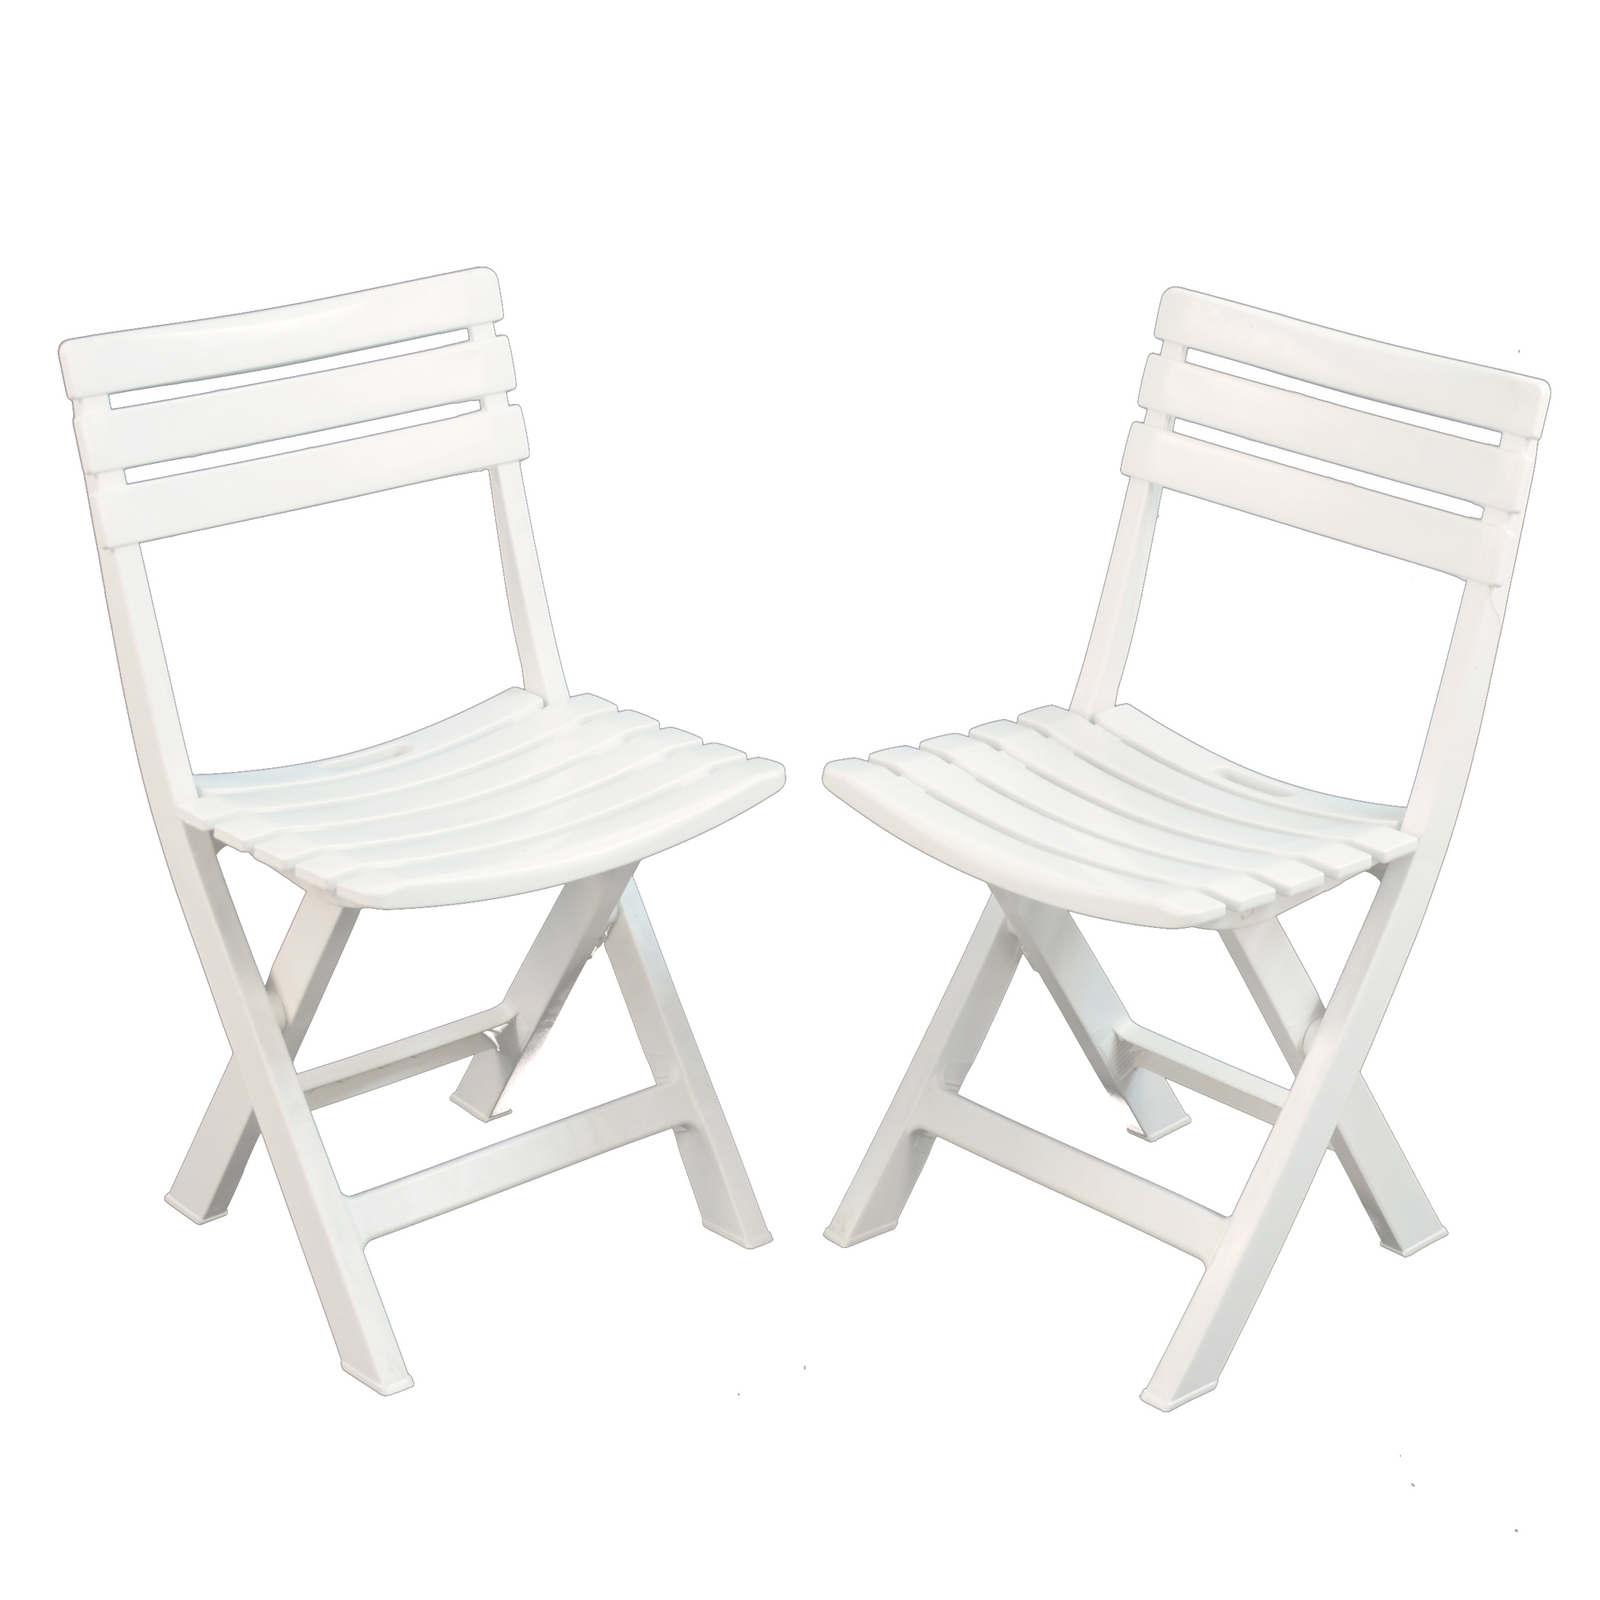 Trabella Boretto Folding Table With 2 Brescia Chairs Set in White Dining Sets Trabella Default Title  